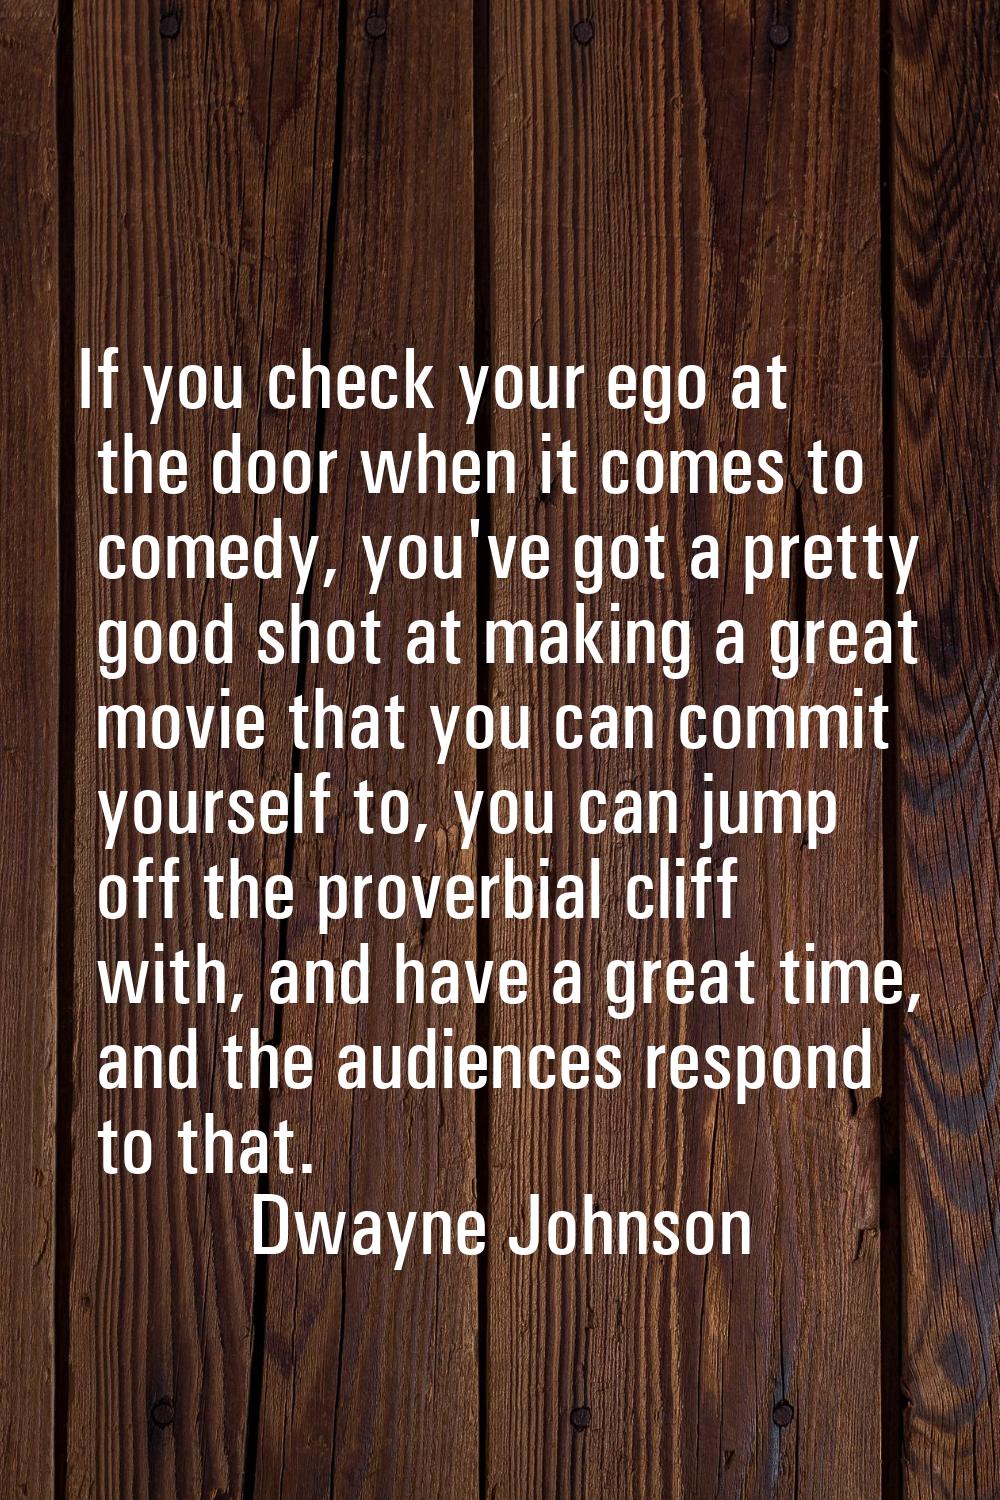 If you check your ego at the door when it comes to comedy, you've got a pretty good shot at making 